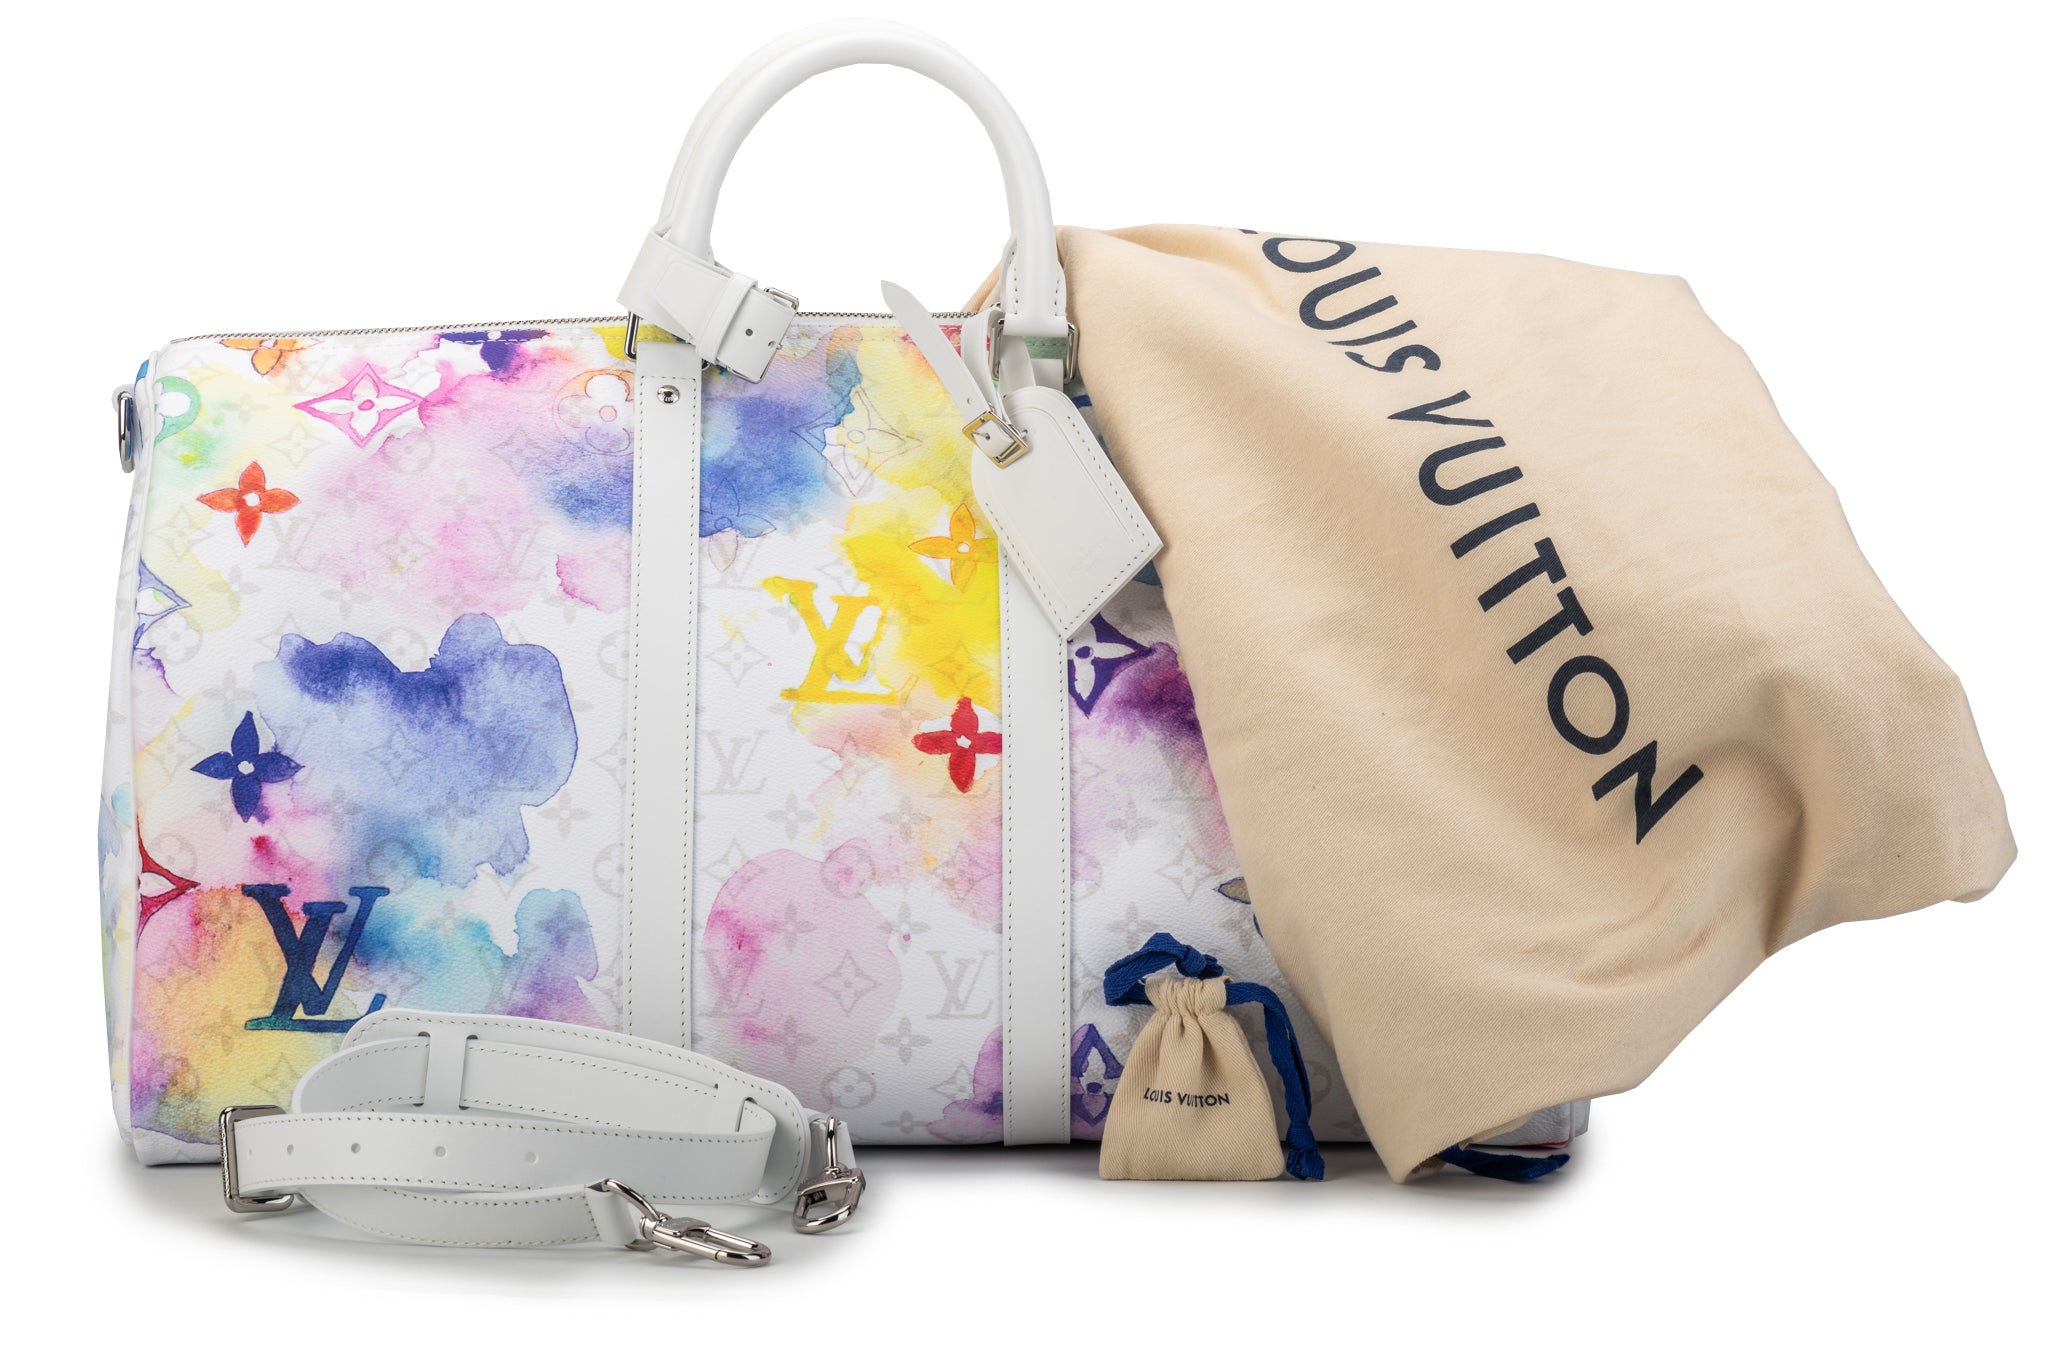 Louis Vuitton Keepall 50 Monogram Watercolor in Canvas with Silver